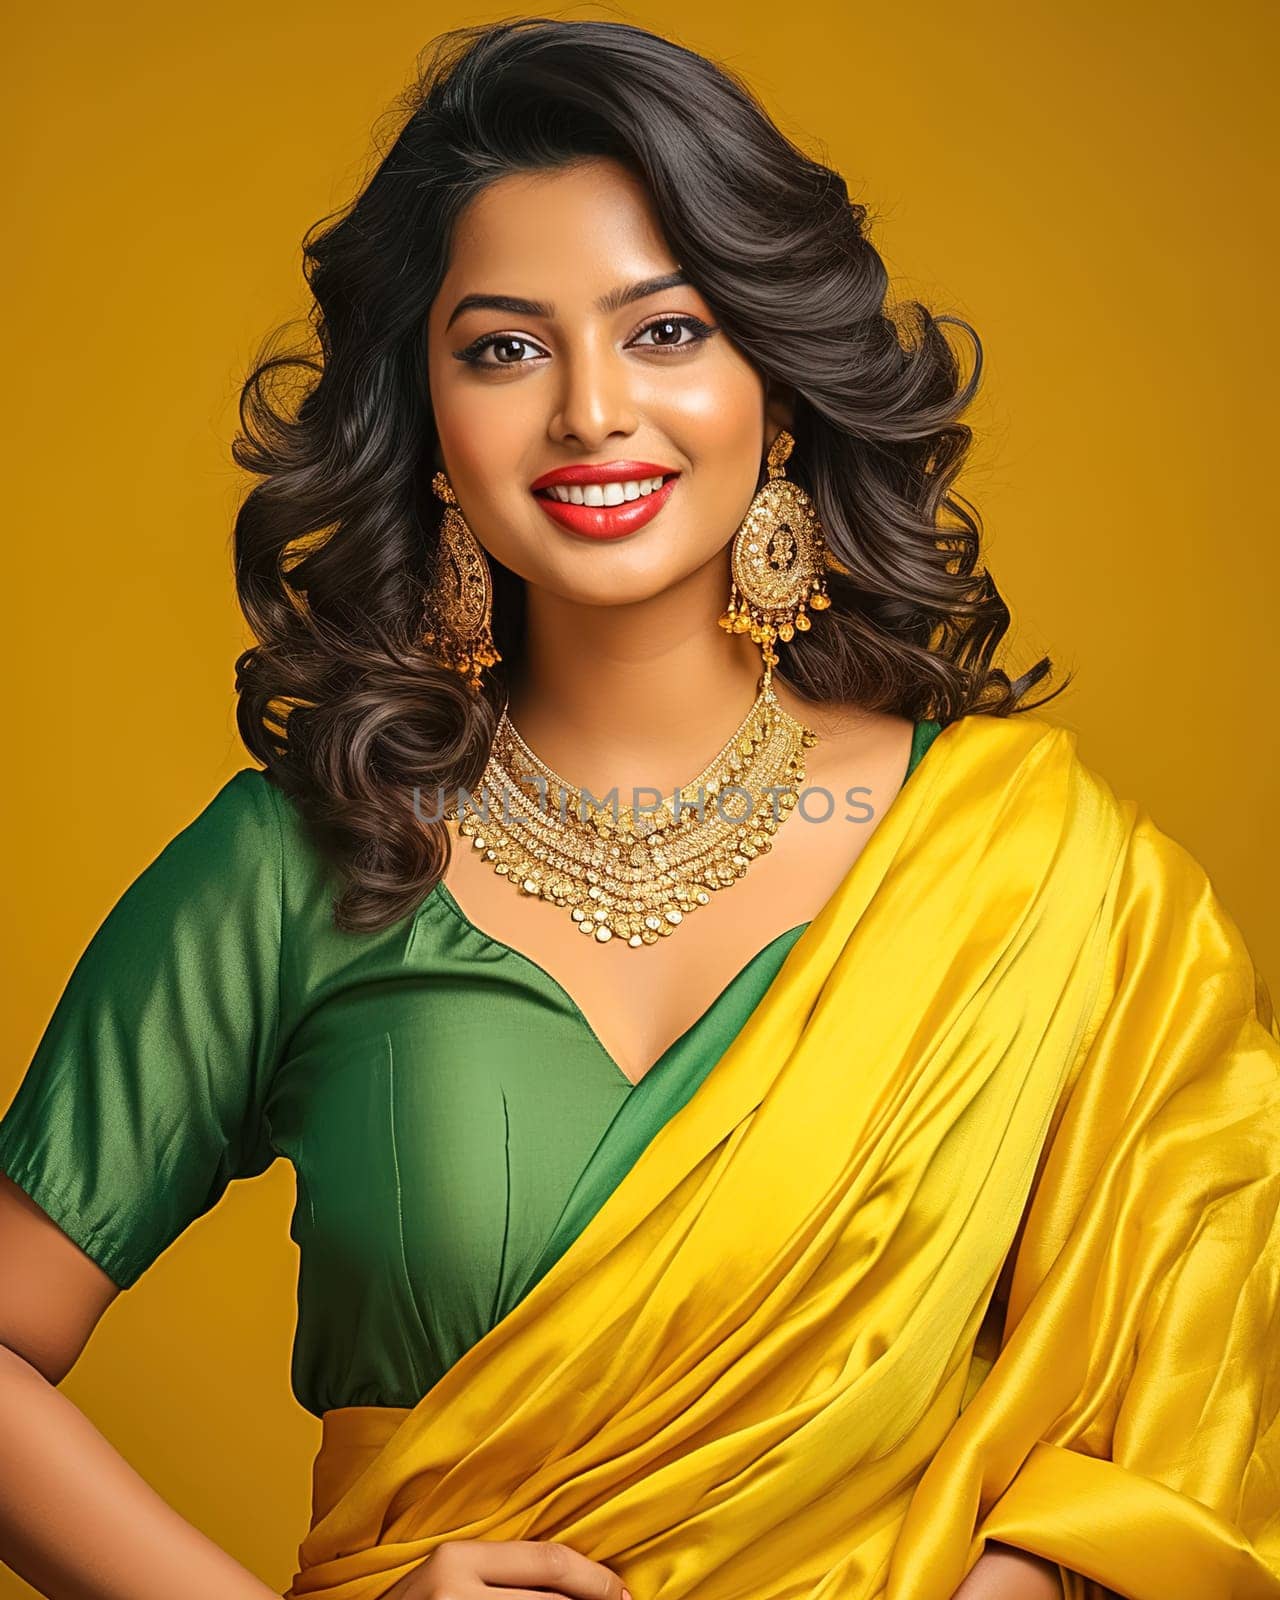 Portrait of Indian woman in green-yellow sari. by Yurich32